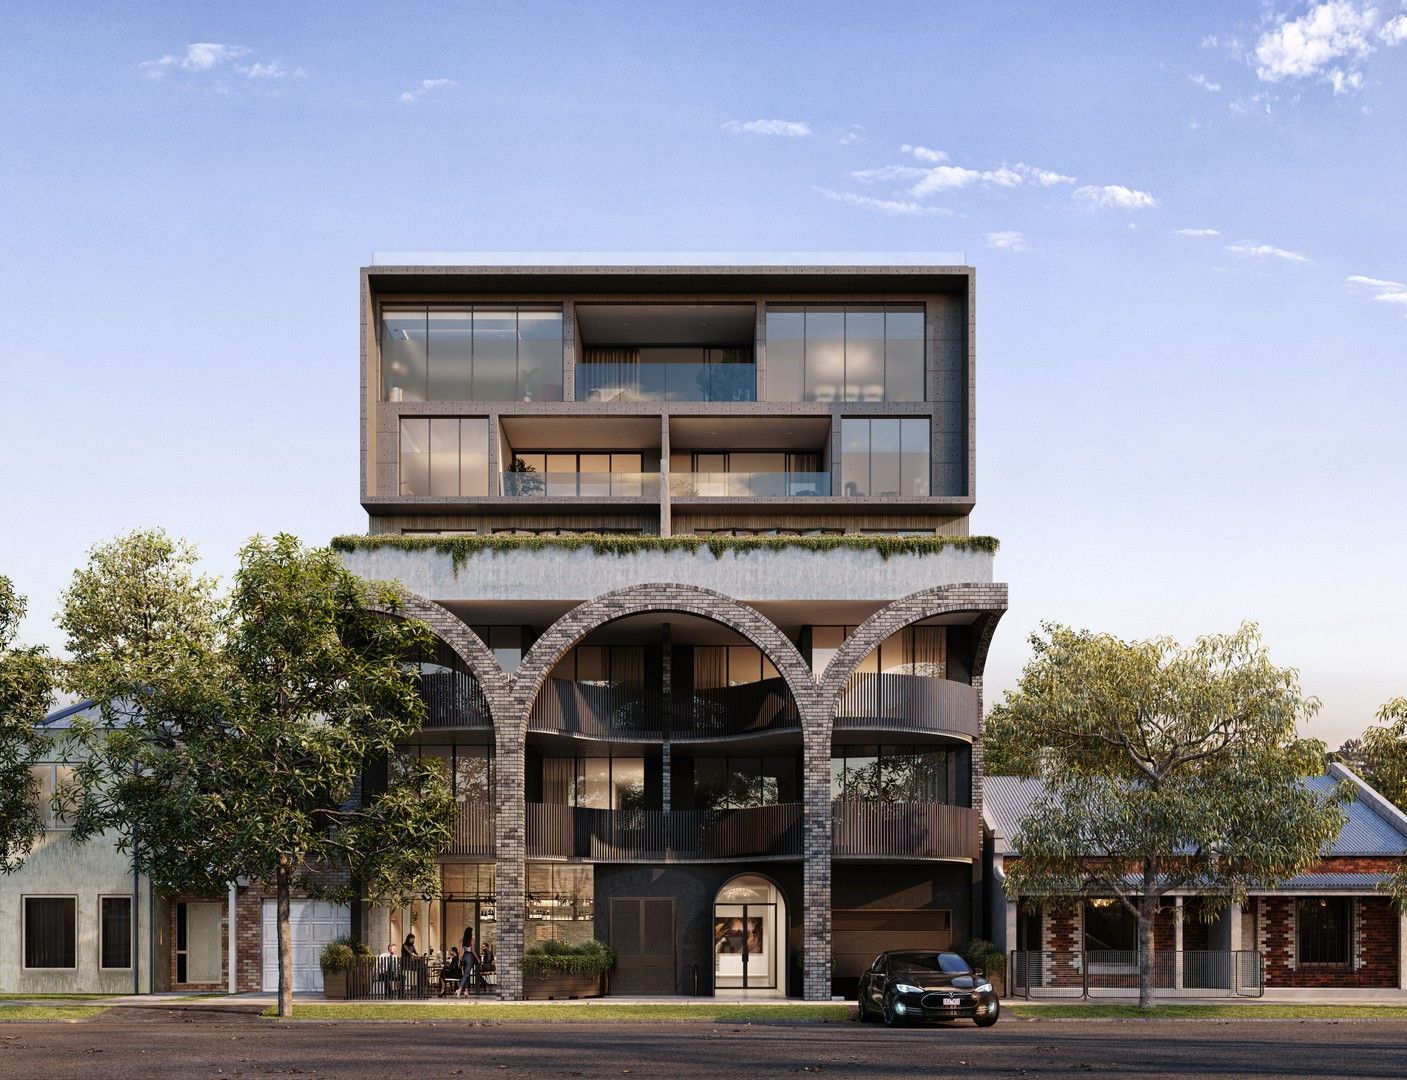 3 bedrooms New Apartments / Off the Plan in 302/66-68 Pickett Street FOOTSCRAY VIC, 3011